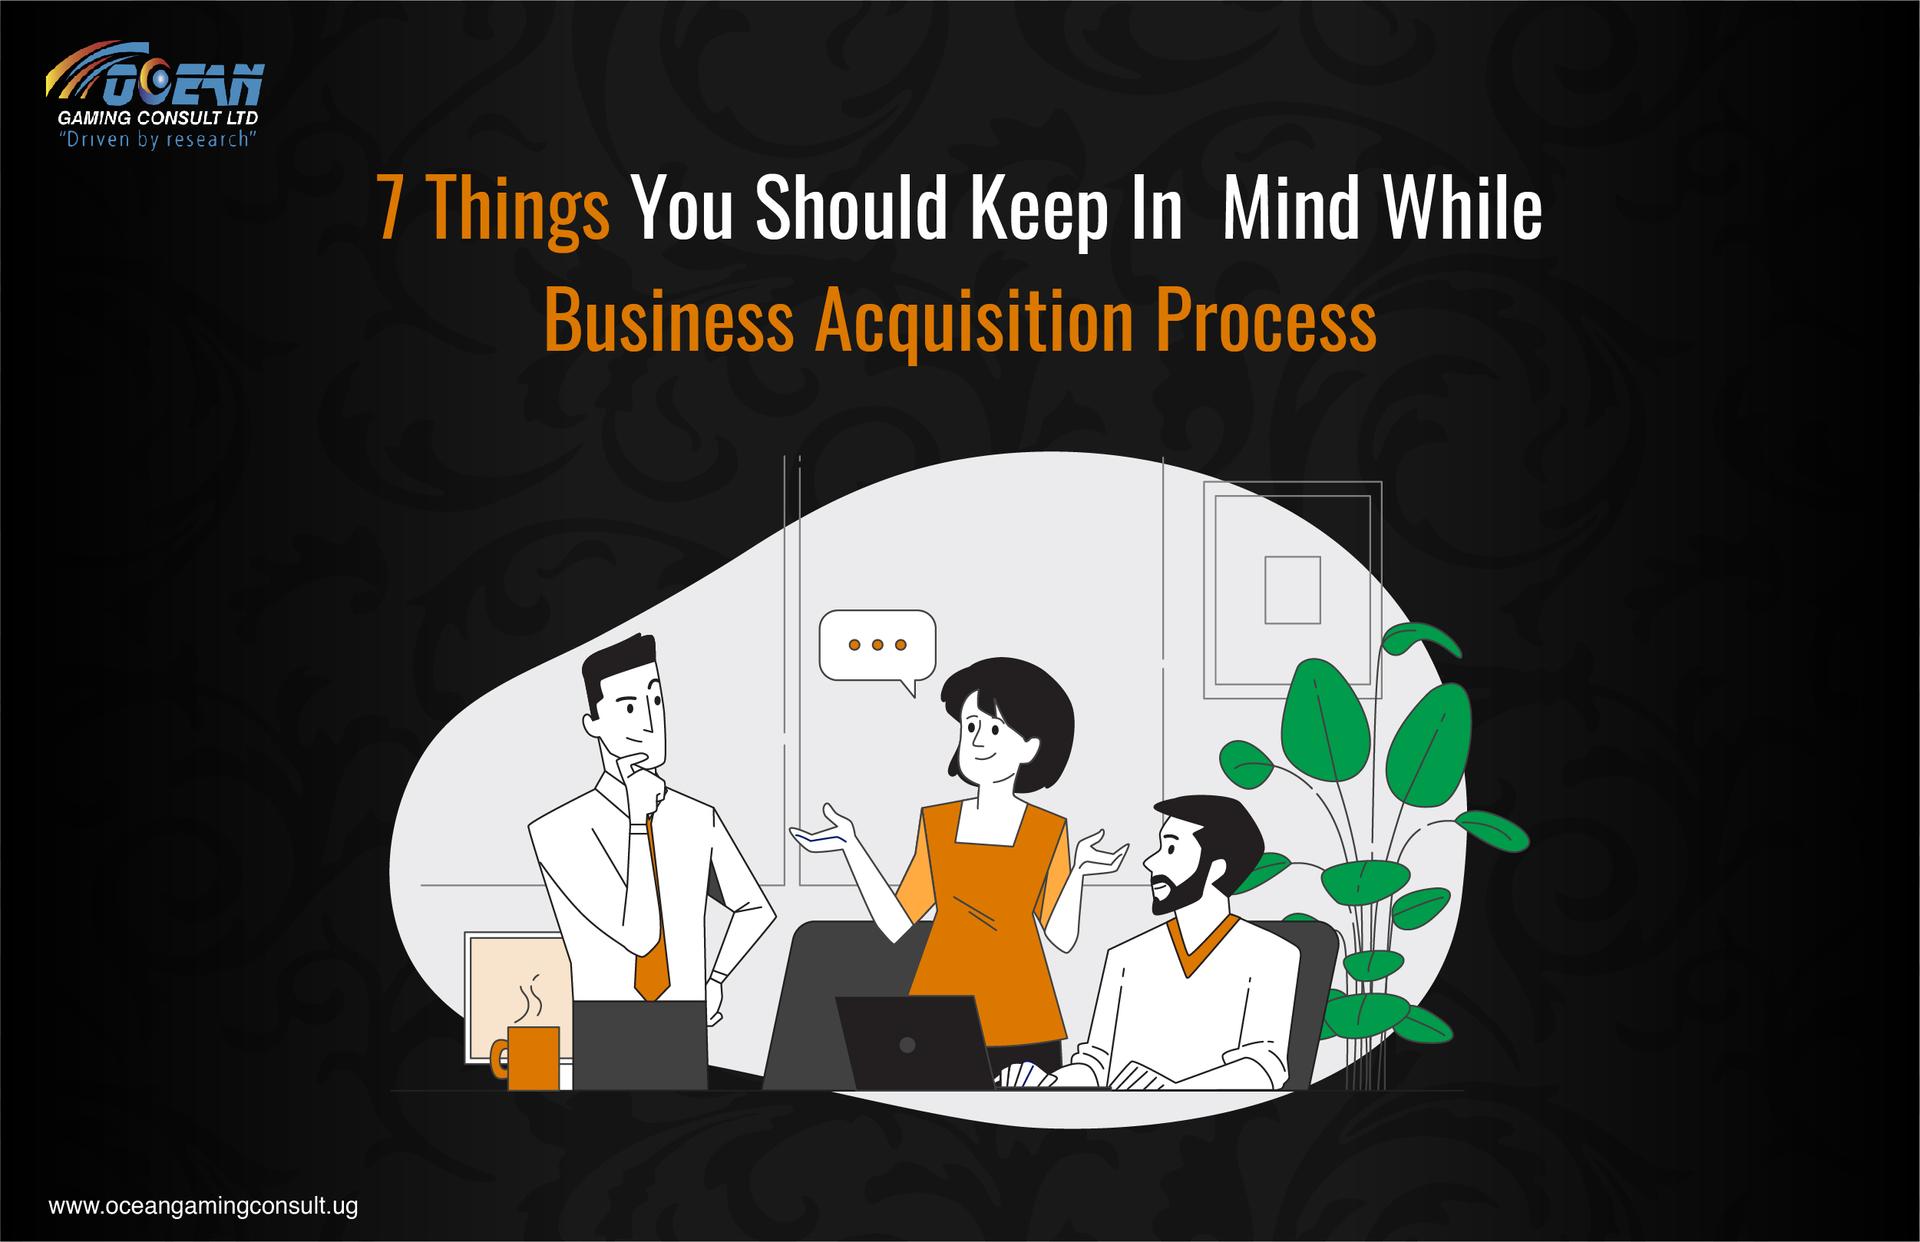 7 Things You Should Keep In Mind While Business Acquisition Process